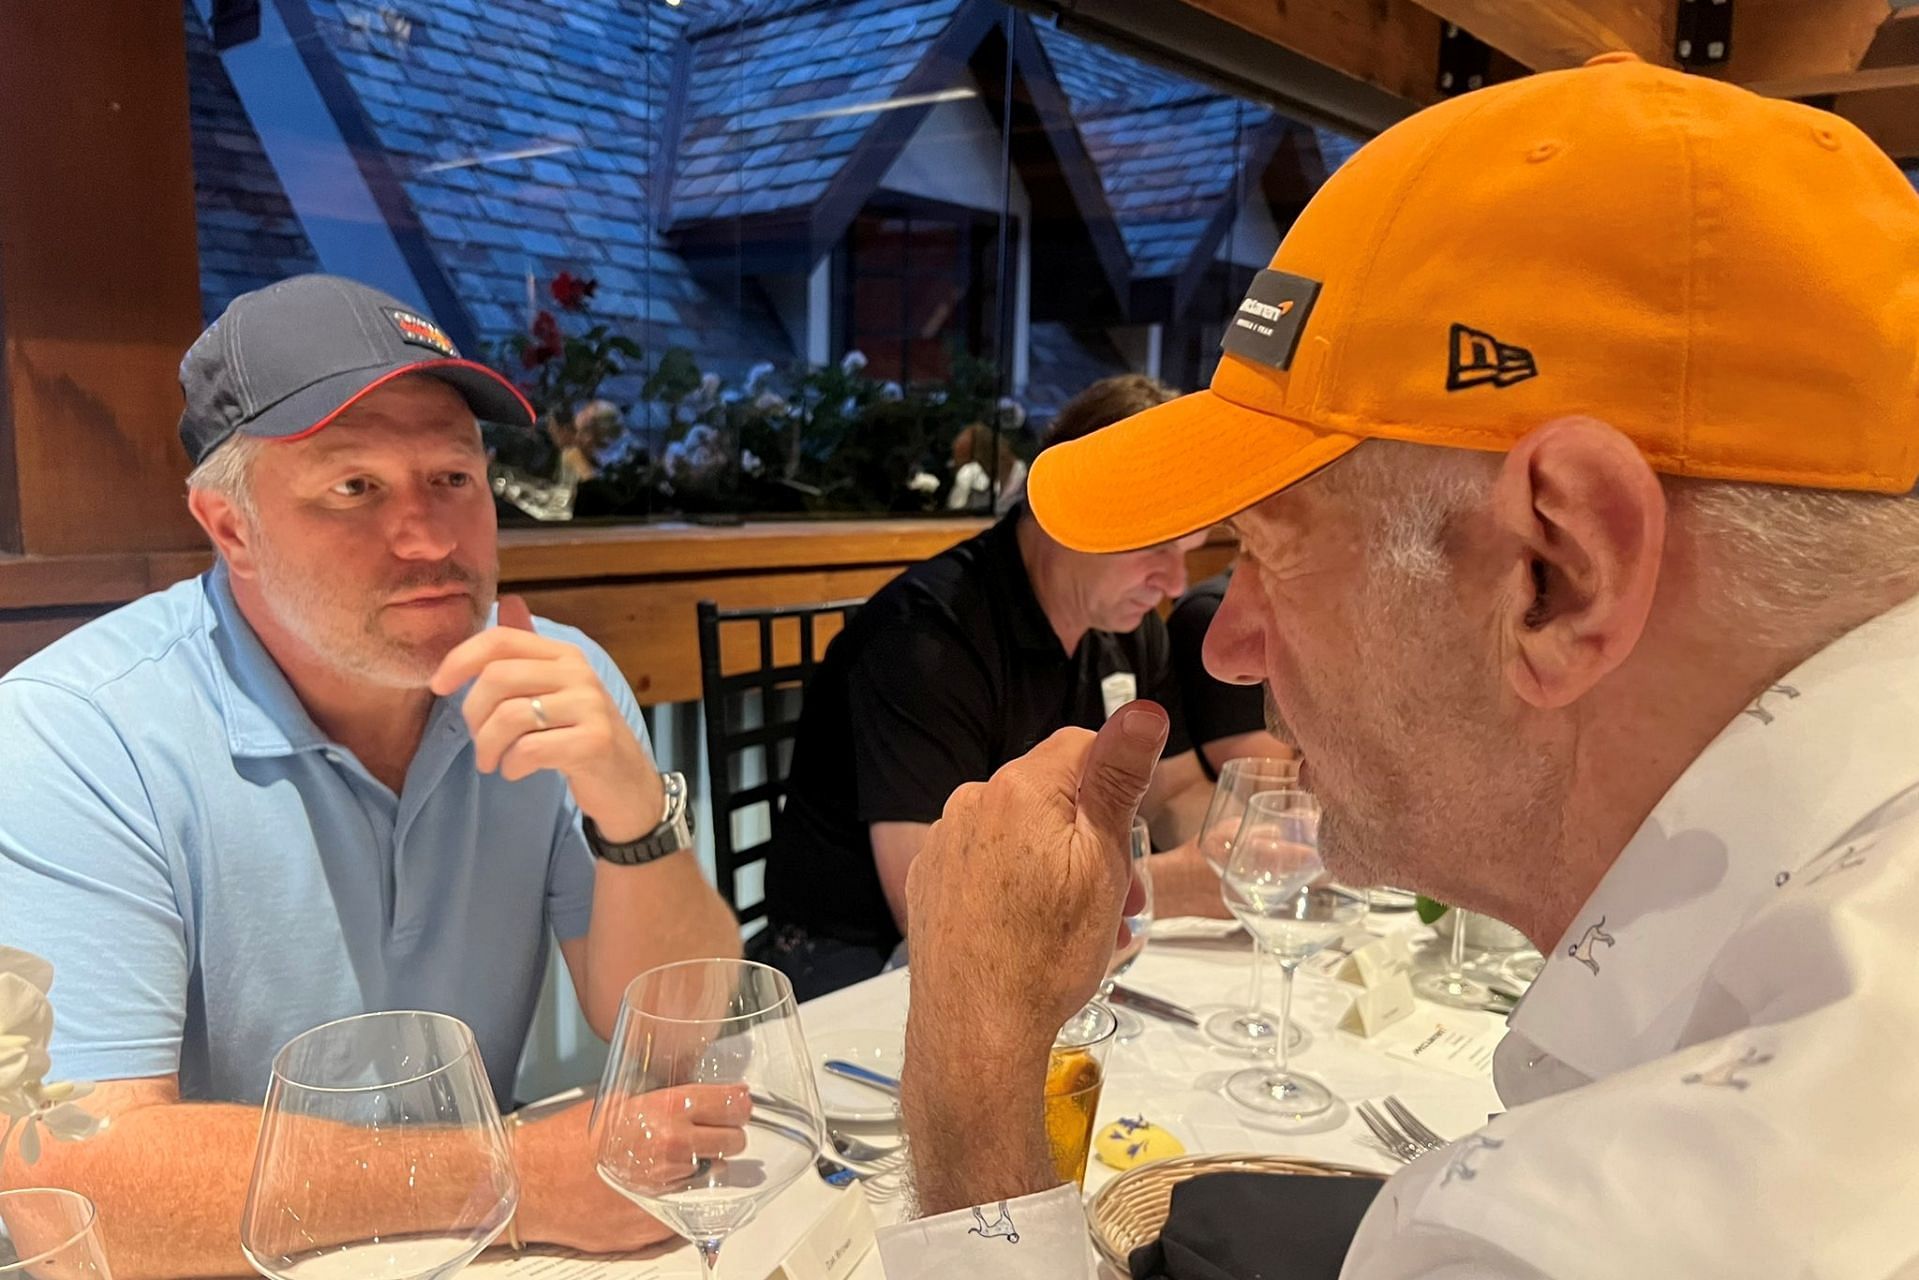 McLaren CEO Zak Brown (L) and Red Bull chief designer Andrian Newey (R) (Image via Twitter/@ZBrownCEO)